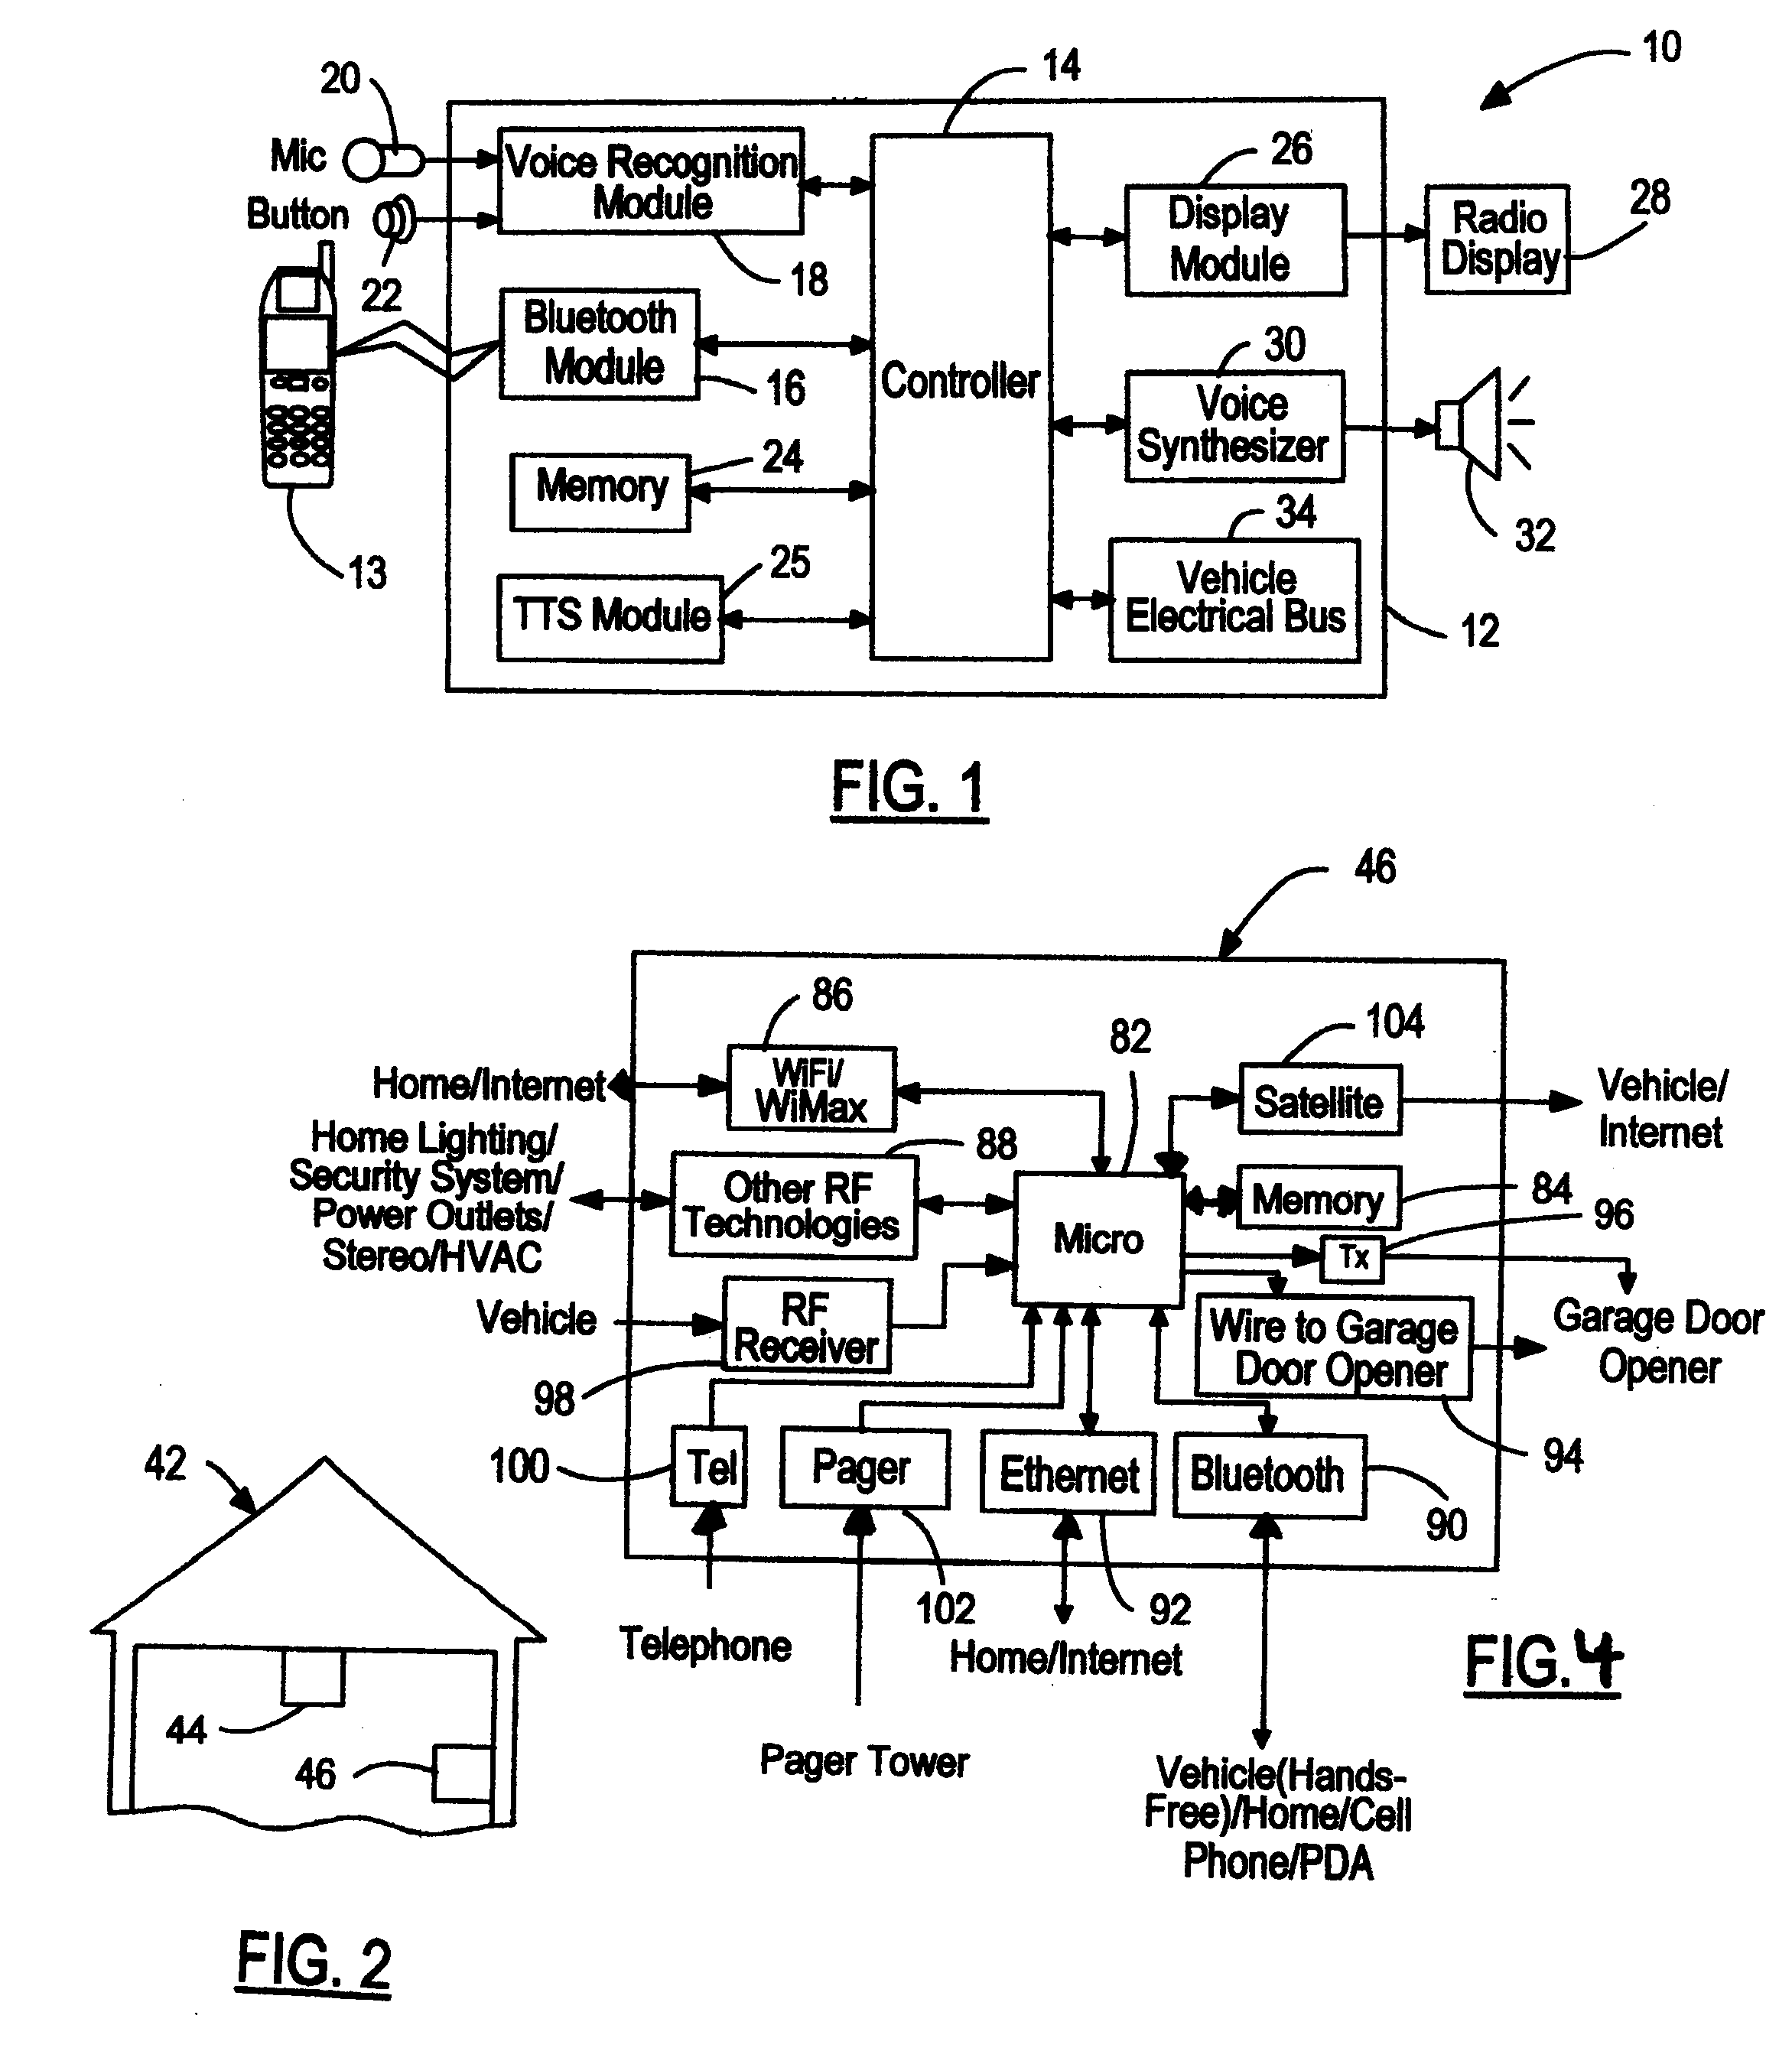 Garage door opener communications gateway module for enabling communications among vehicles, house devices, and telecommunications networks